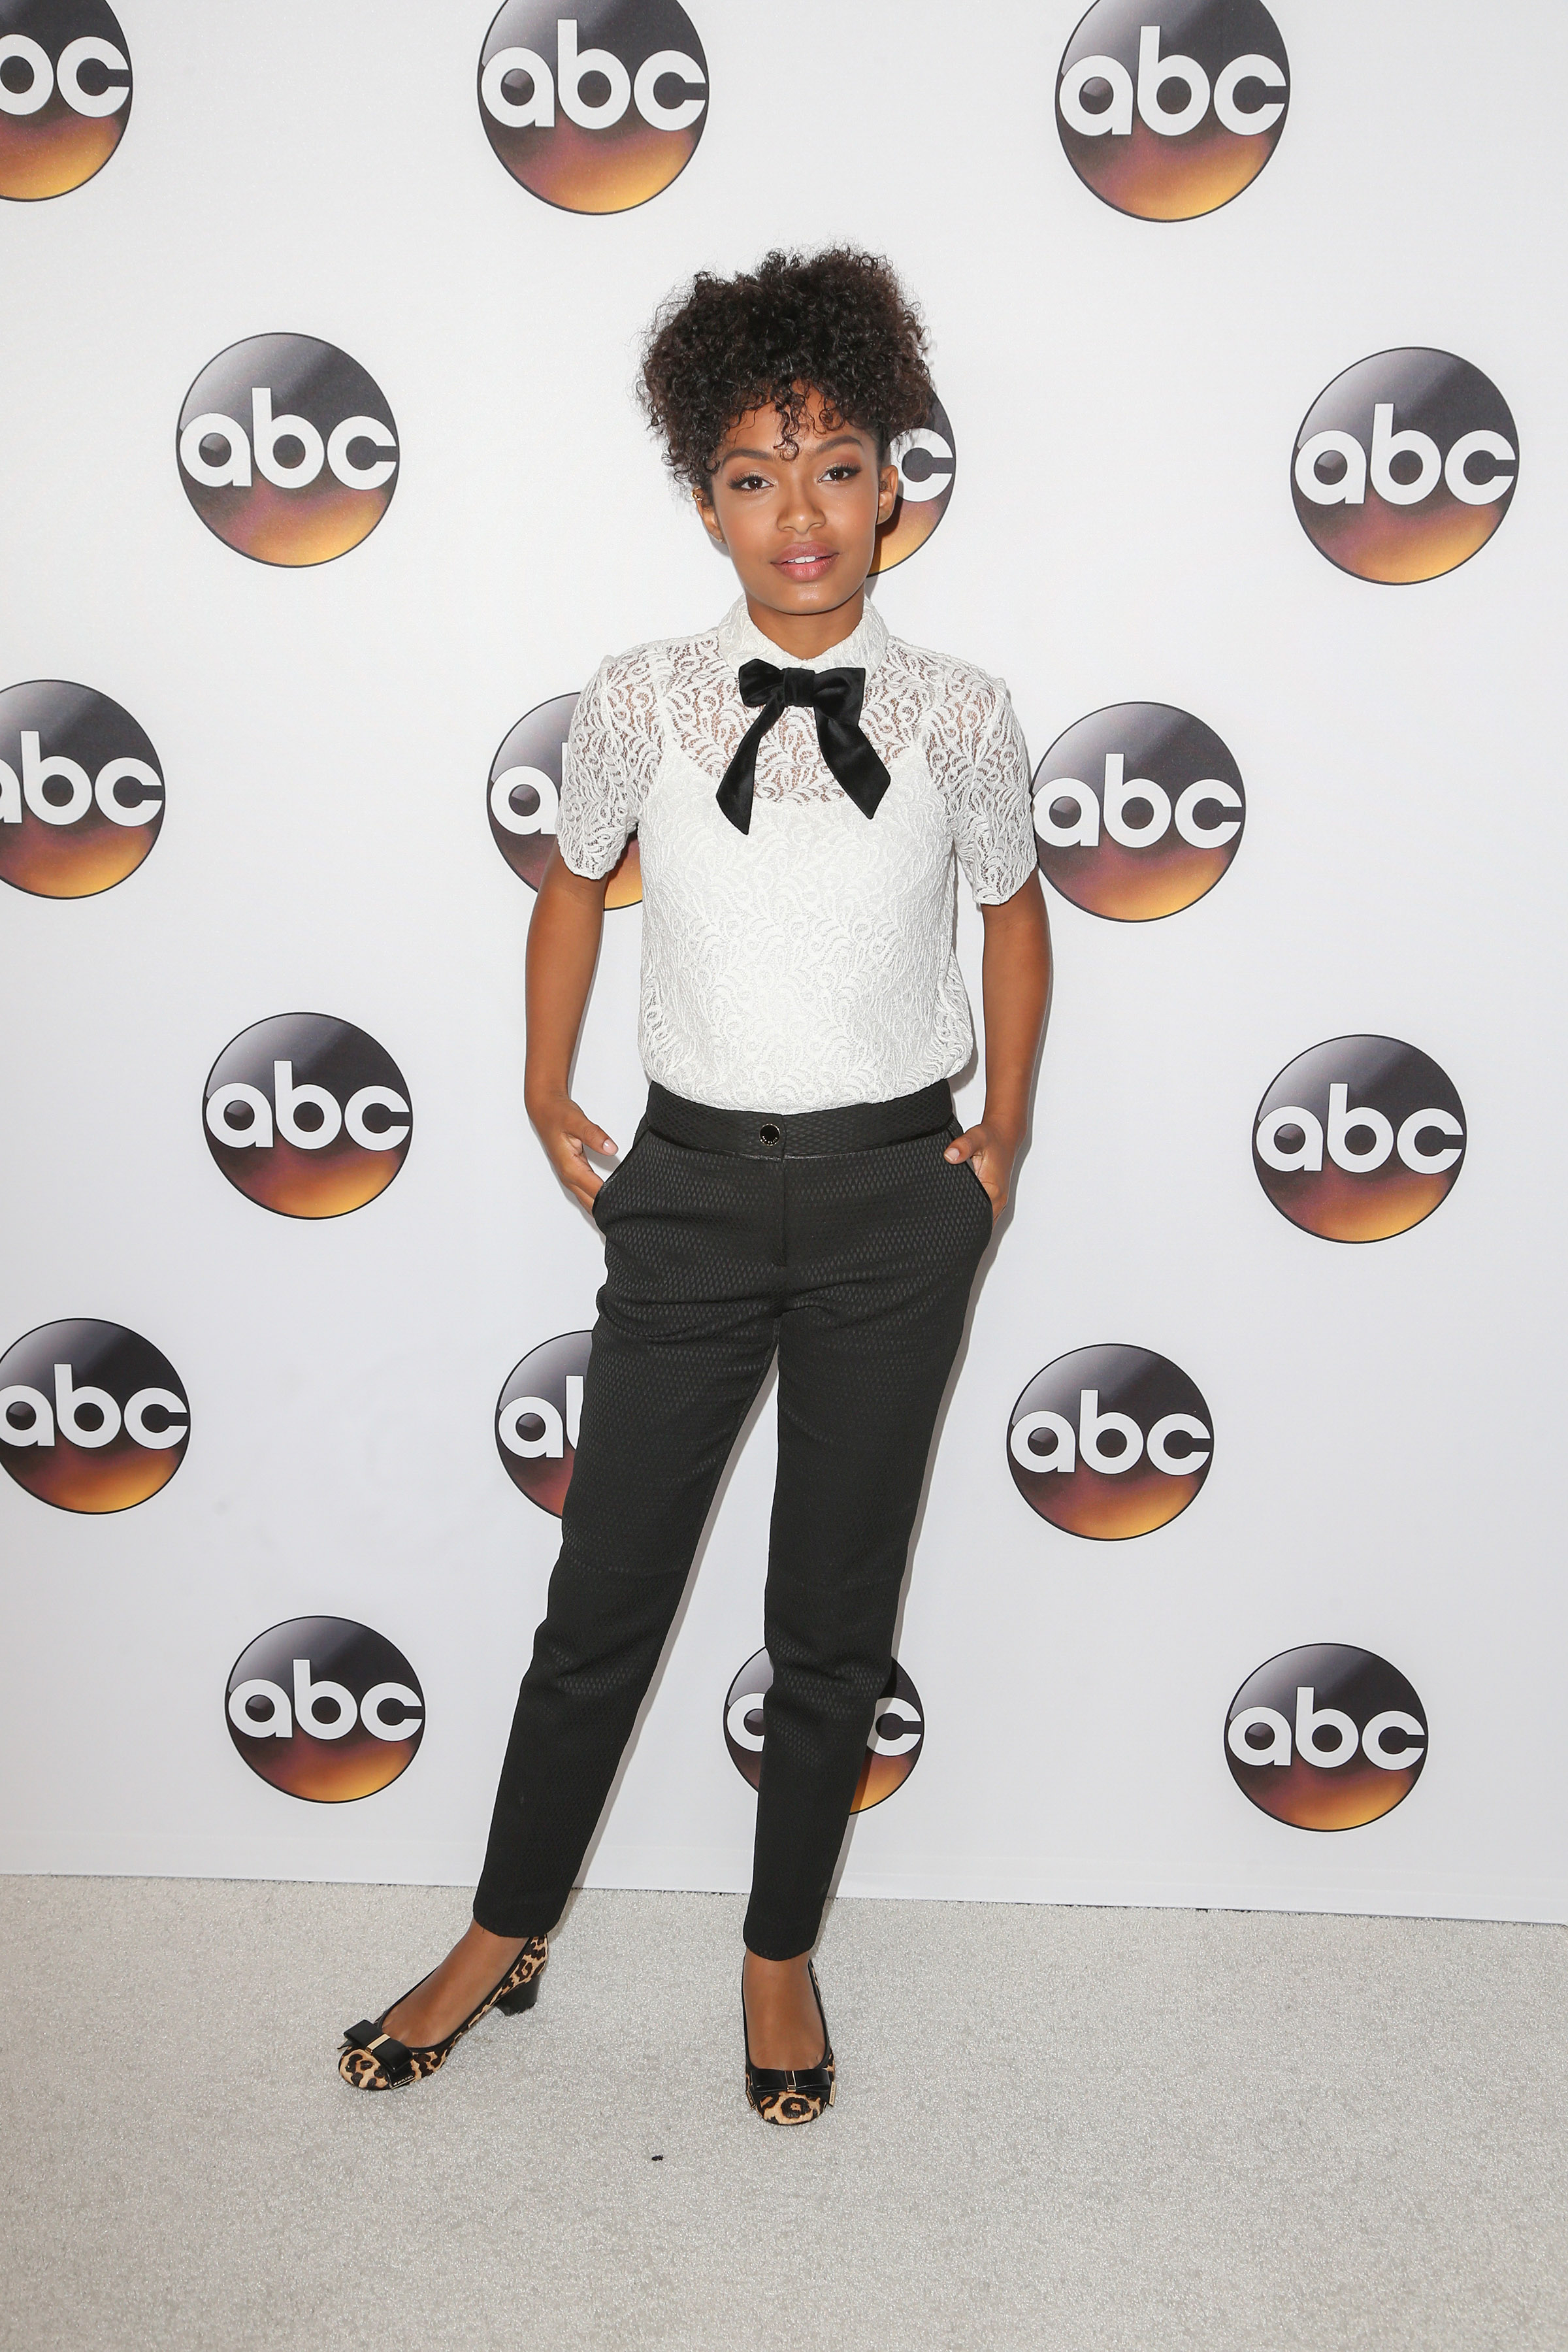 08/04/2016 - Yara Shahidi - 2016 Summer TCA Press Tour - Disney/ABC Television Group - Arrivals - The Beverly Hilton Hotel - Beverly Hills, CA, USA - Keywords: Vertical, Radio, Theatrical Performance, Social Event, Television Show, TV Show, Arrival, Portrait, Photography, Red Carpet Event, Annual Event, Arts Culture and Entertainment, Celebrity, Celebrities, Television Critics Association Awards, Person, People, California Orientation: Portrait Face Count: 1 - False - Photo Credit: PRPhotos.com - Contact (1-866-551-7827) - Portrait Face Count: 1